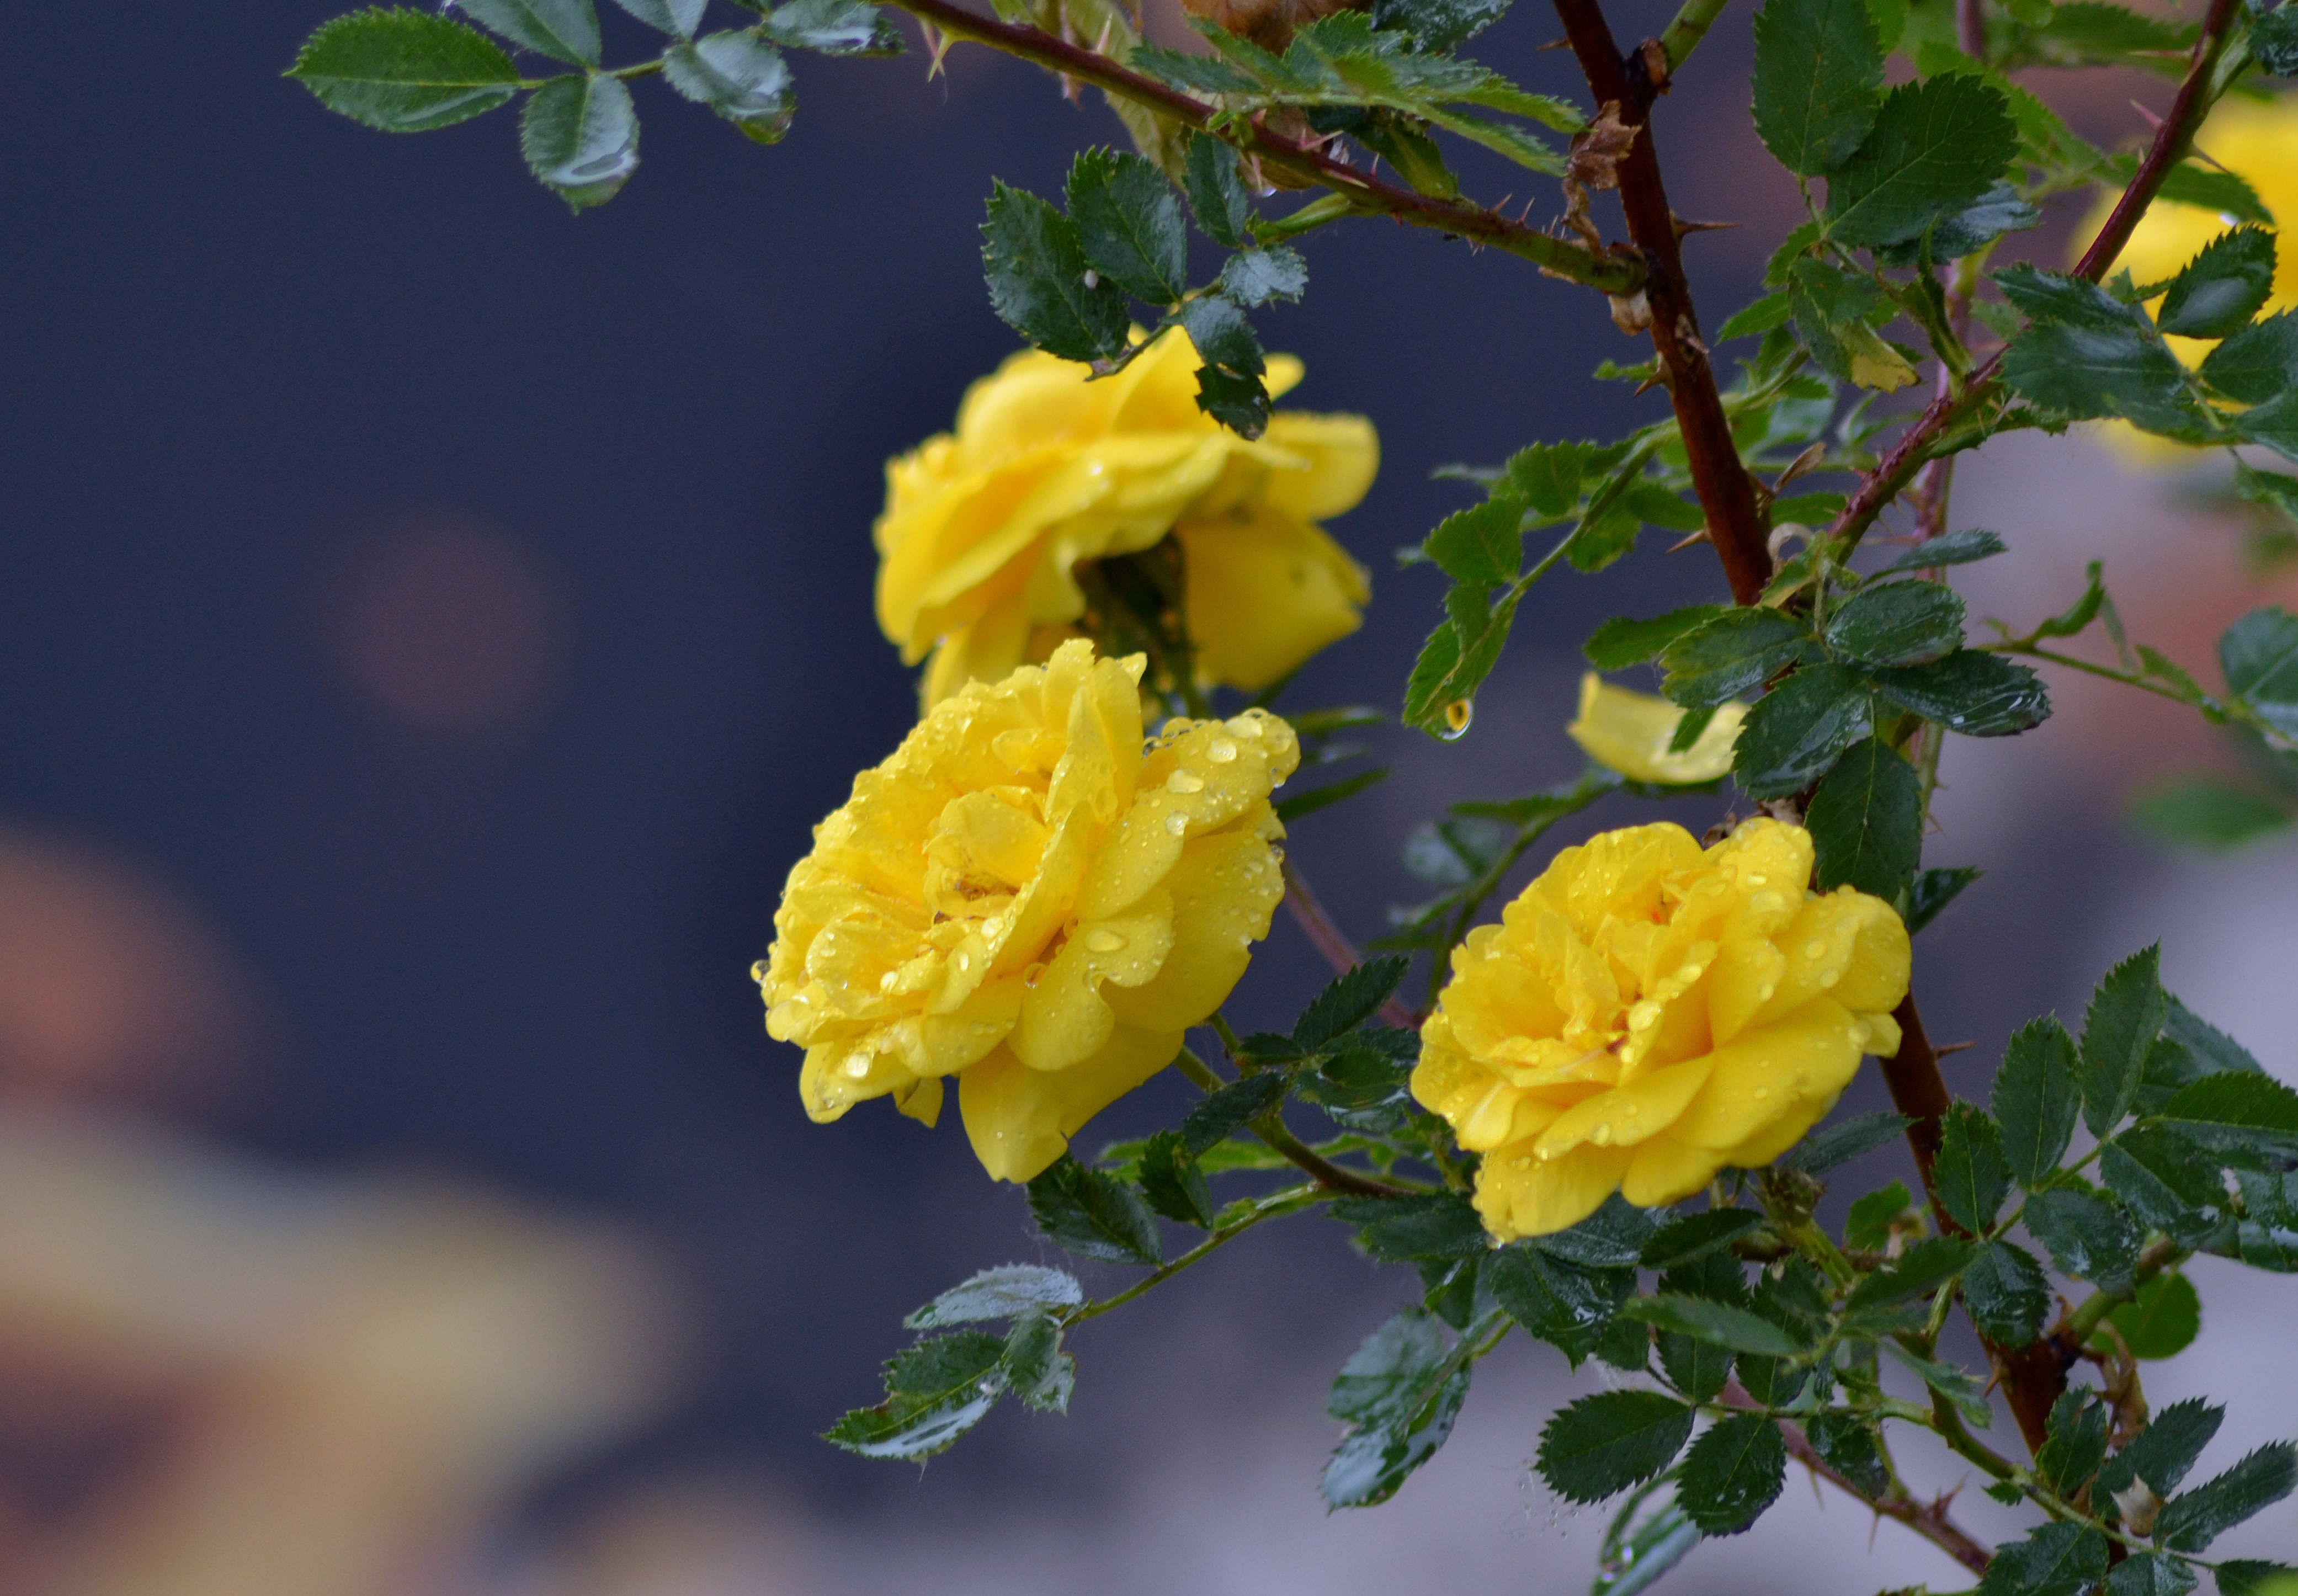 roses, flowers, drops, branch, yellow roses Image for desktop